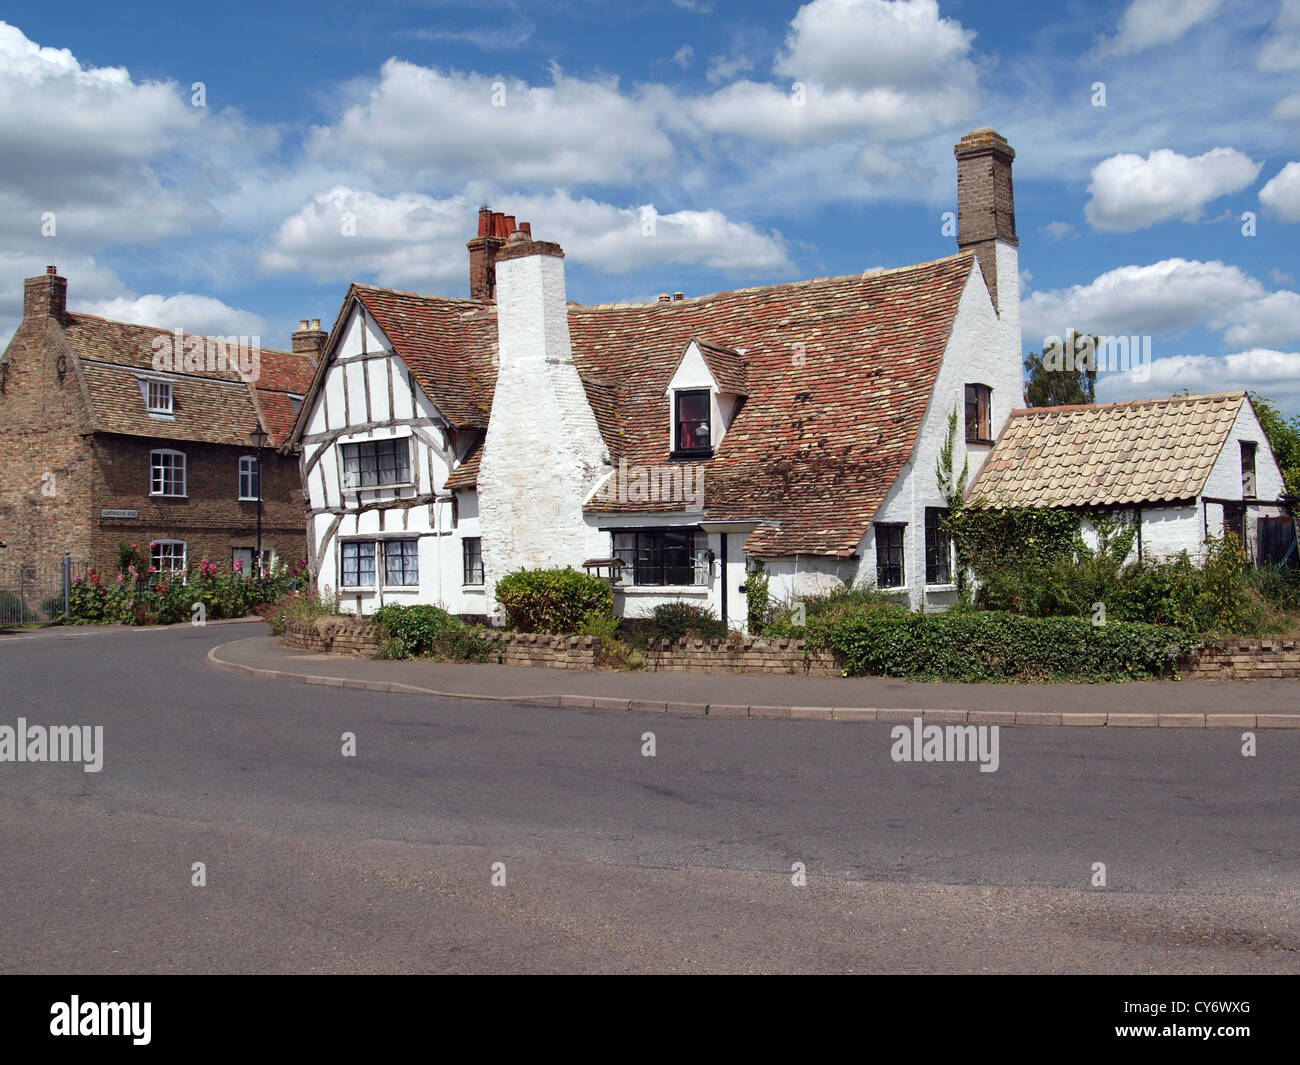 One of many timber framed cottages in Houghton ,that is famous for its mill by the Great Ouse river. Stock Photo